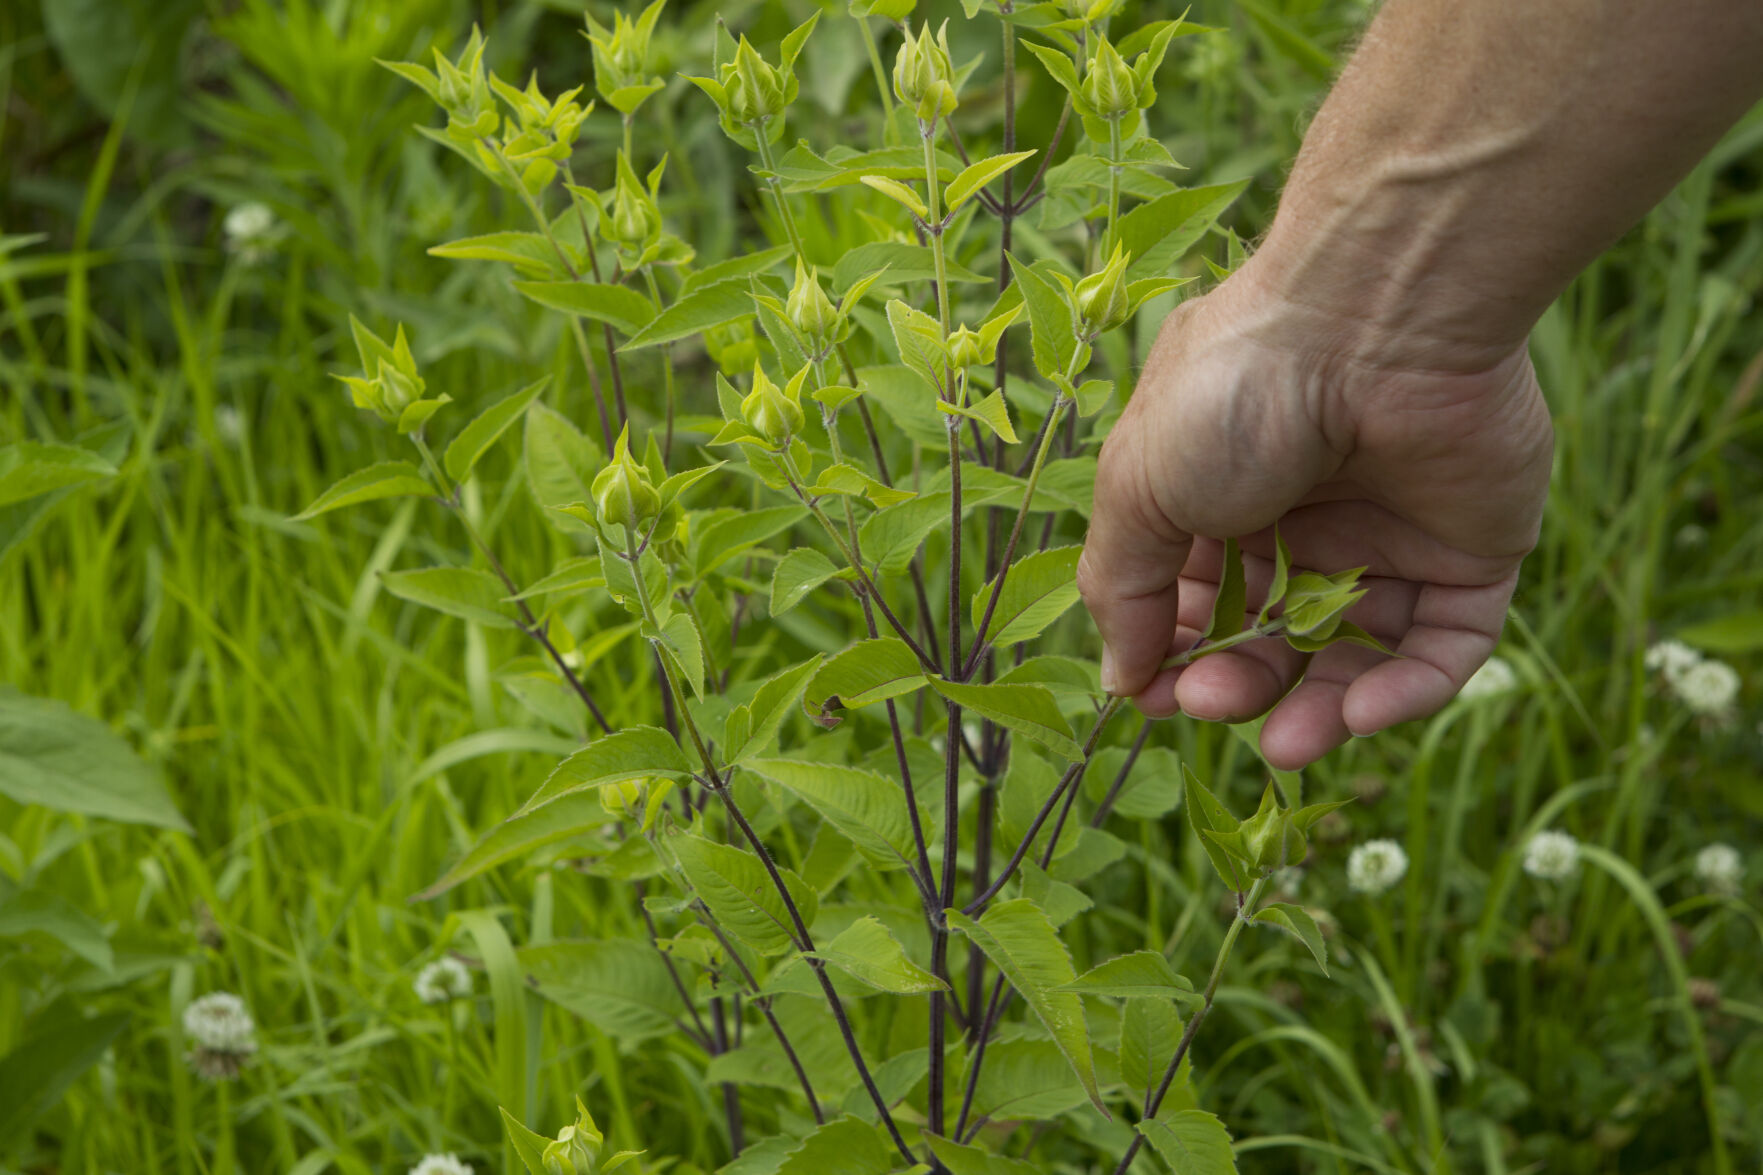 Steve Barg, executive director of Jo Daviess Conservation Foundation, picks a bergamot plant at Gateway Park a 100-acre park and trail on the outskirts of Galena, Ill.    PHOTO CREDIT: File photo